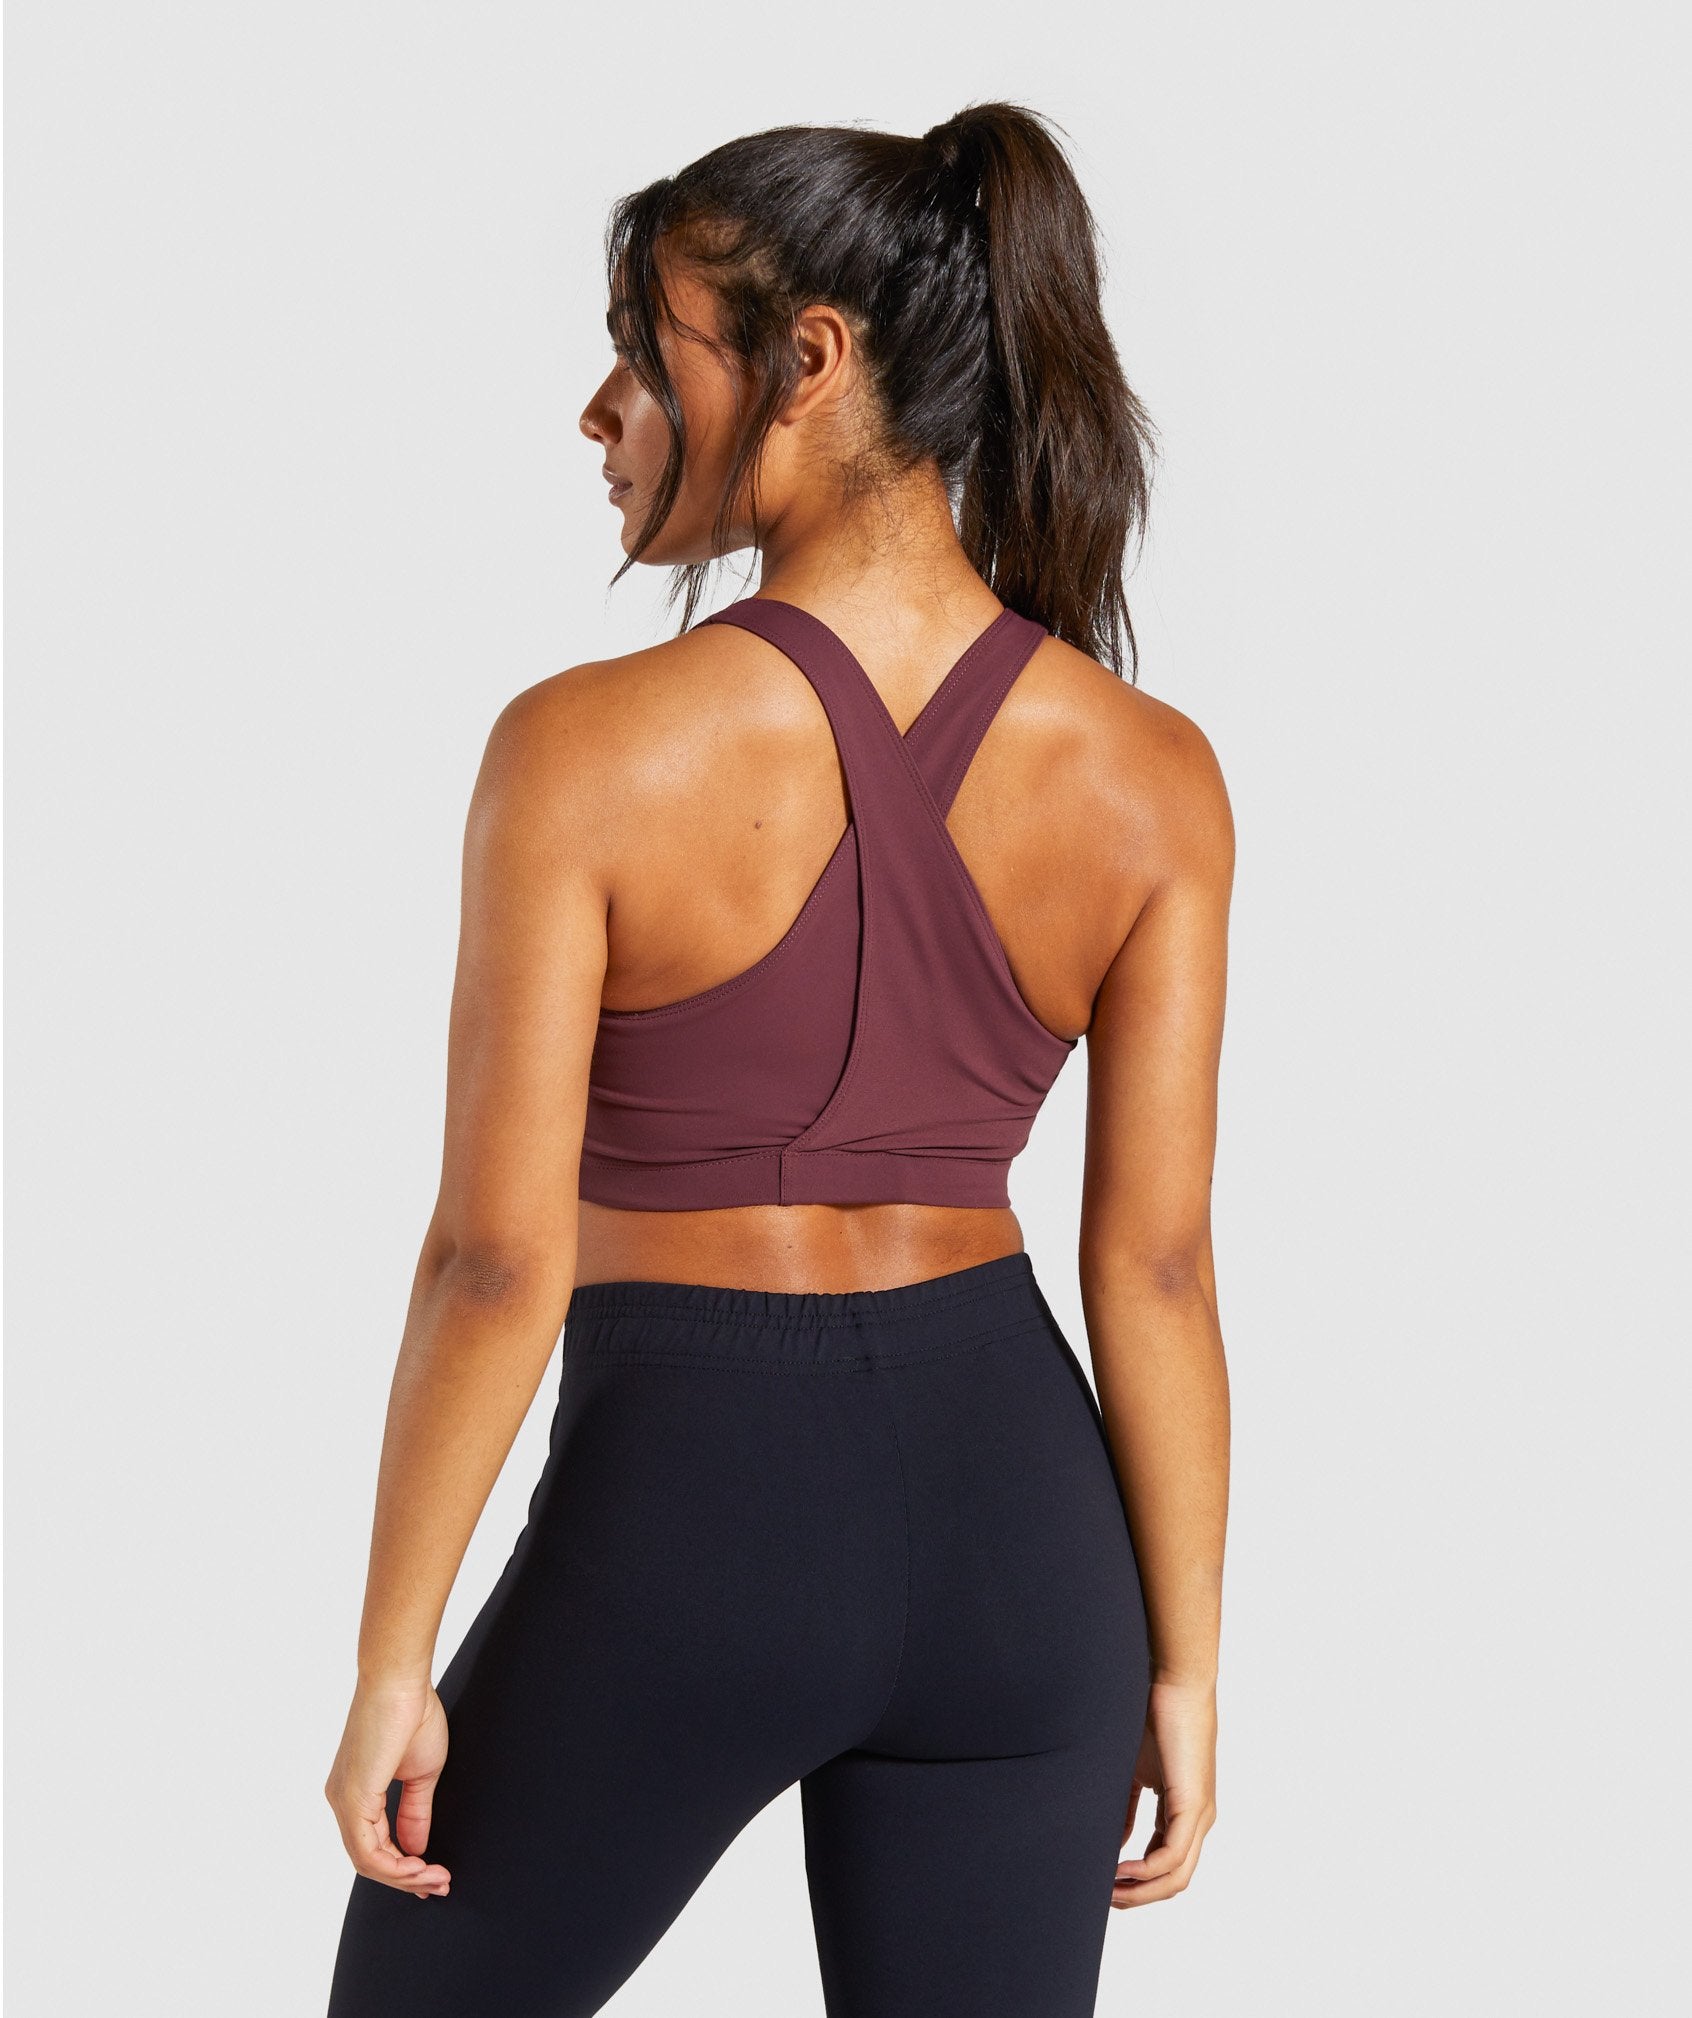 Ark Sports Bra in Berry Red - view 2